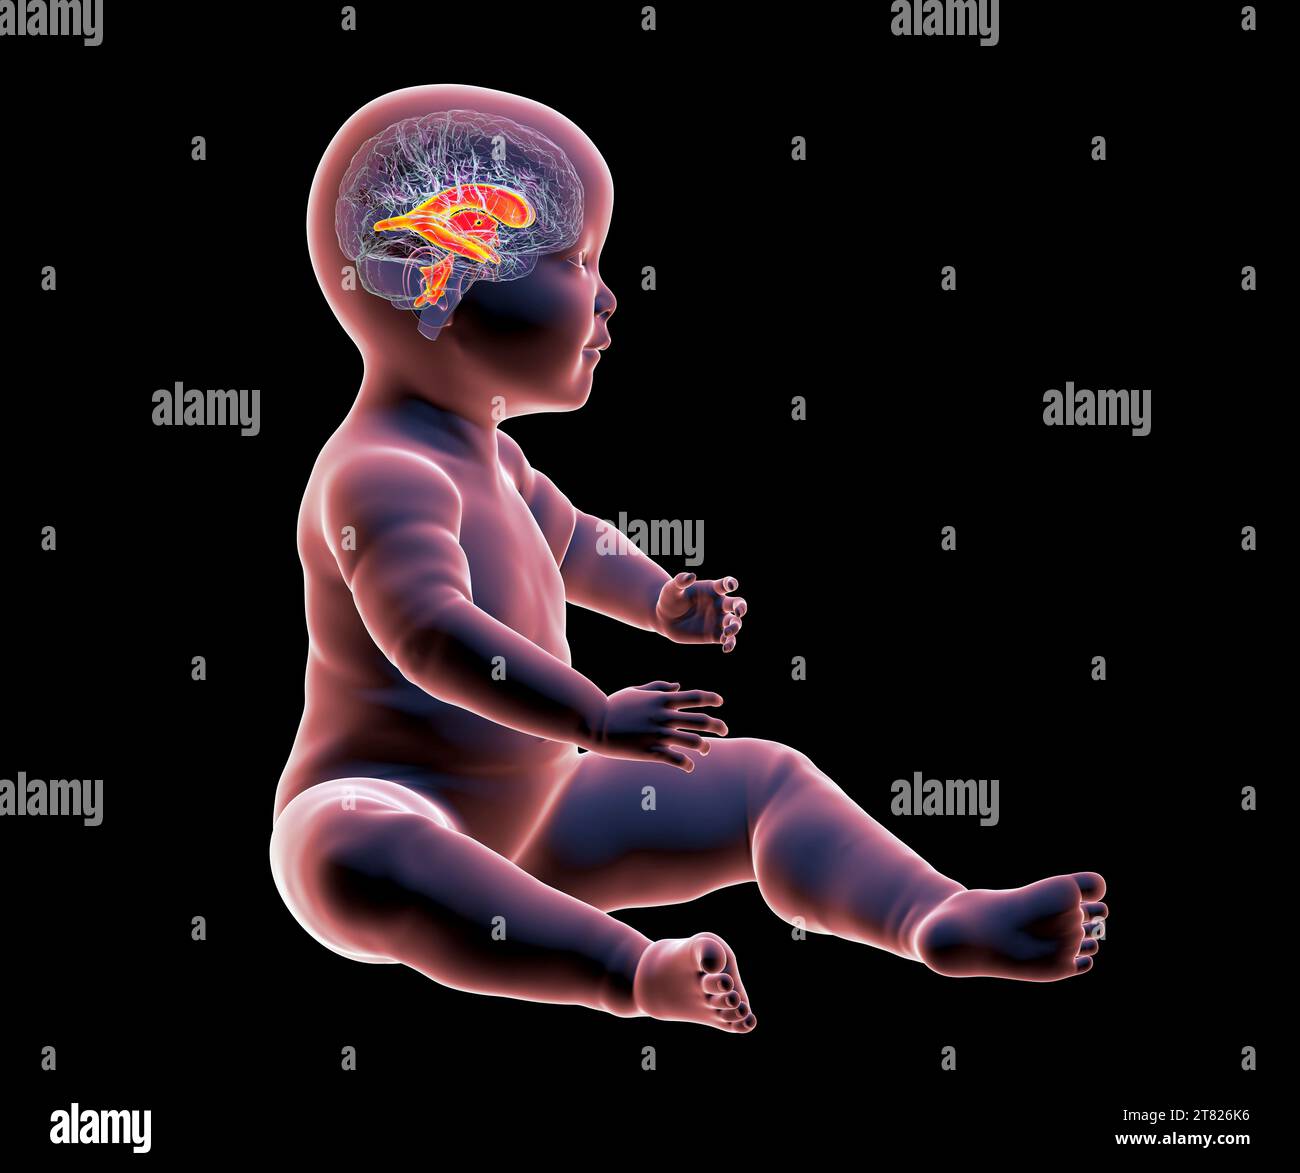 Baby with normal brain ventricles, illustration Stock Photo